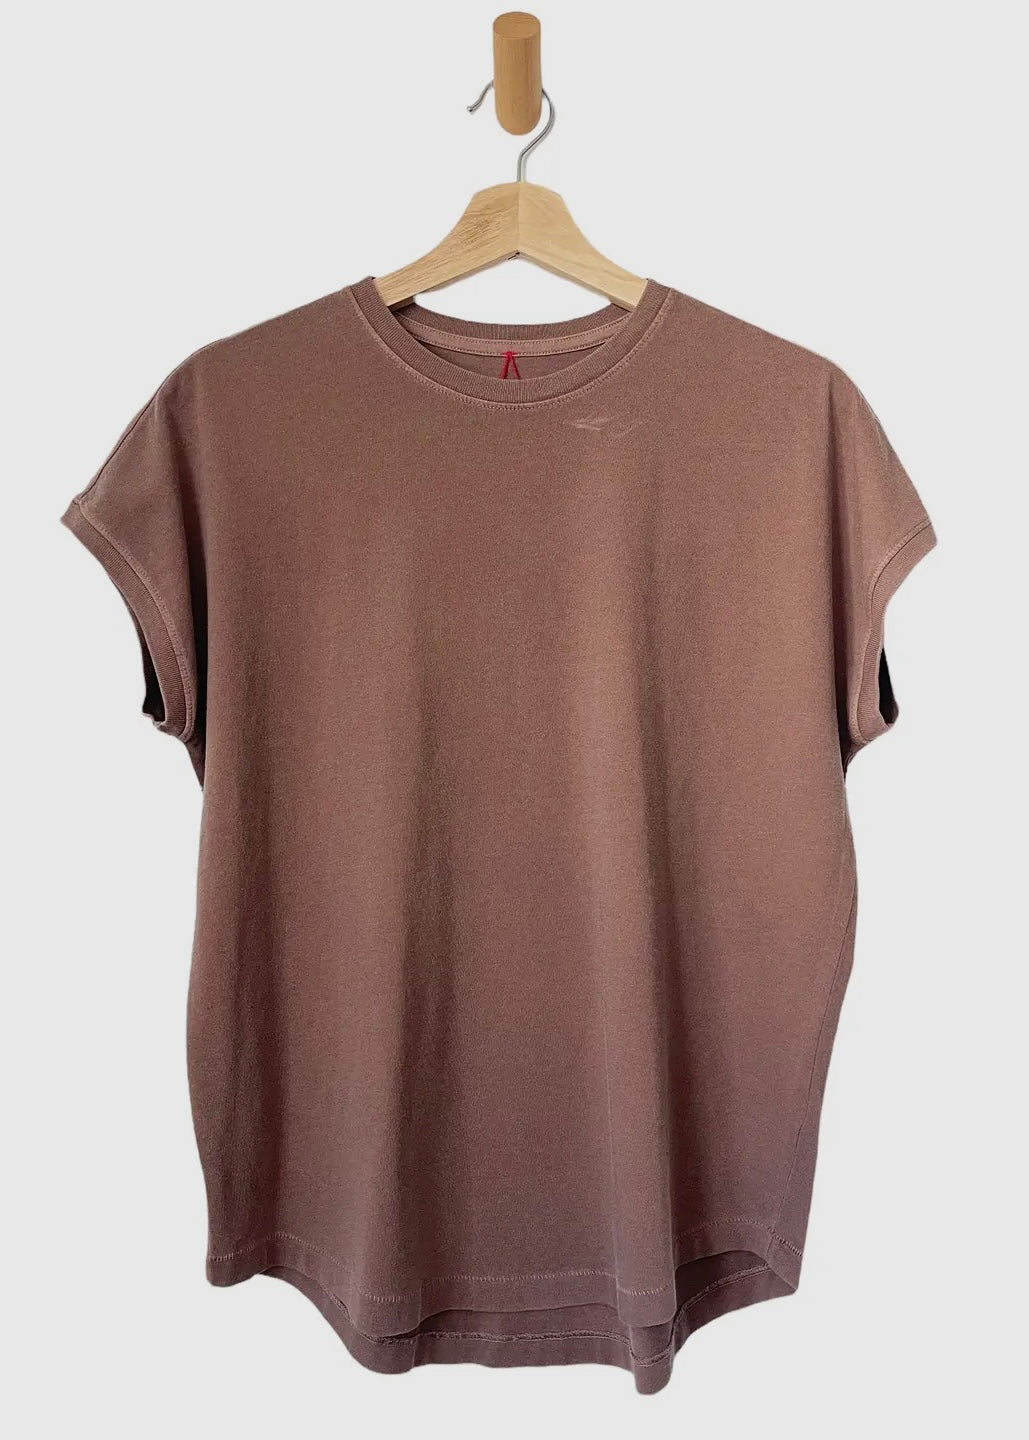 Ease Tee in Chocolate